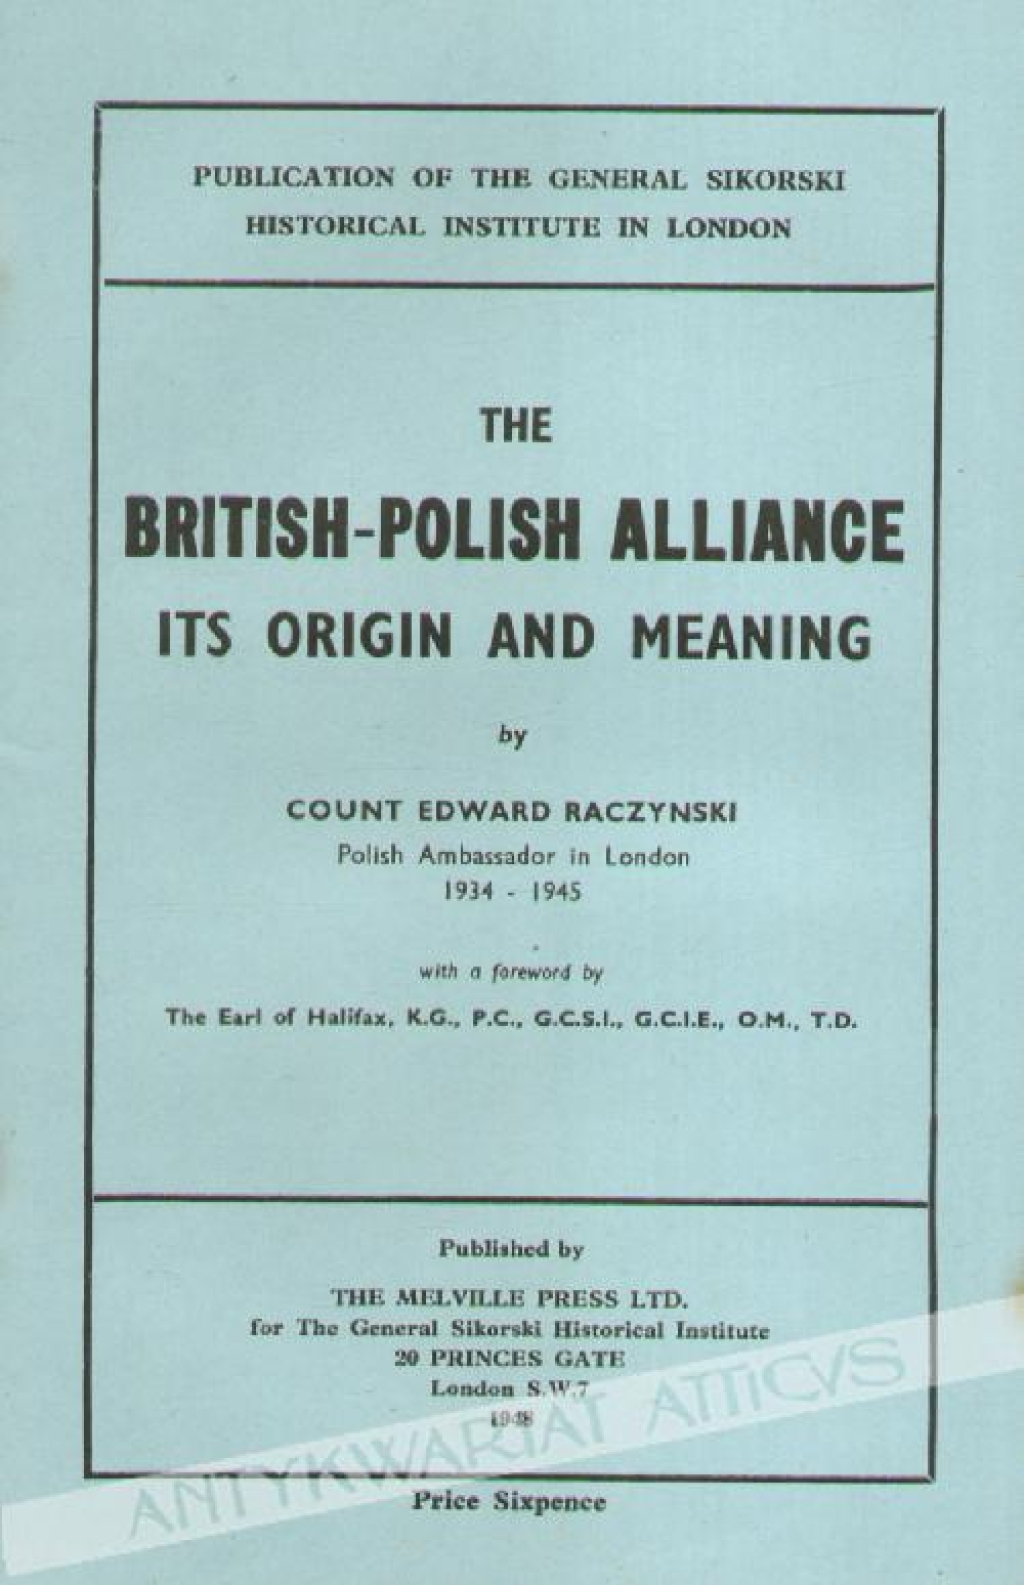 The British-Polish Alliance its origin and meaning